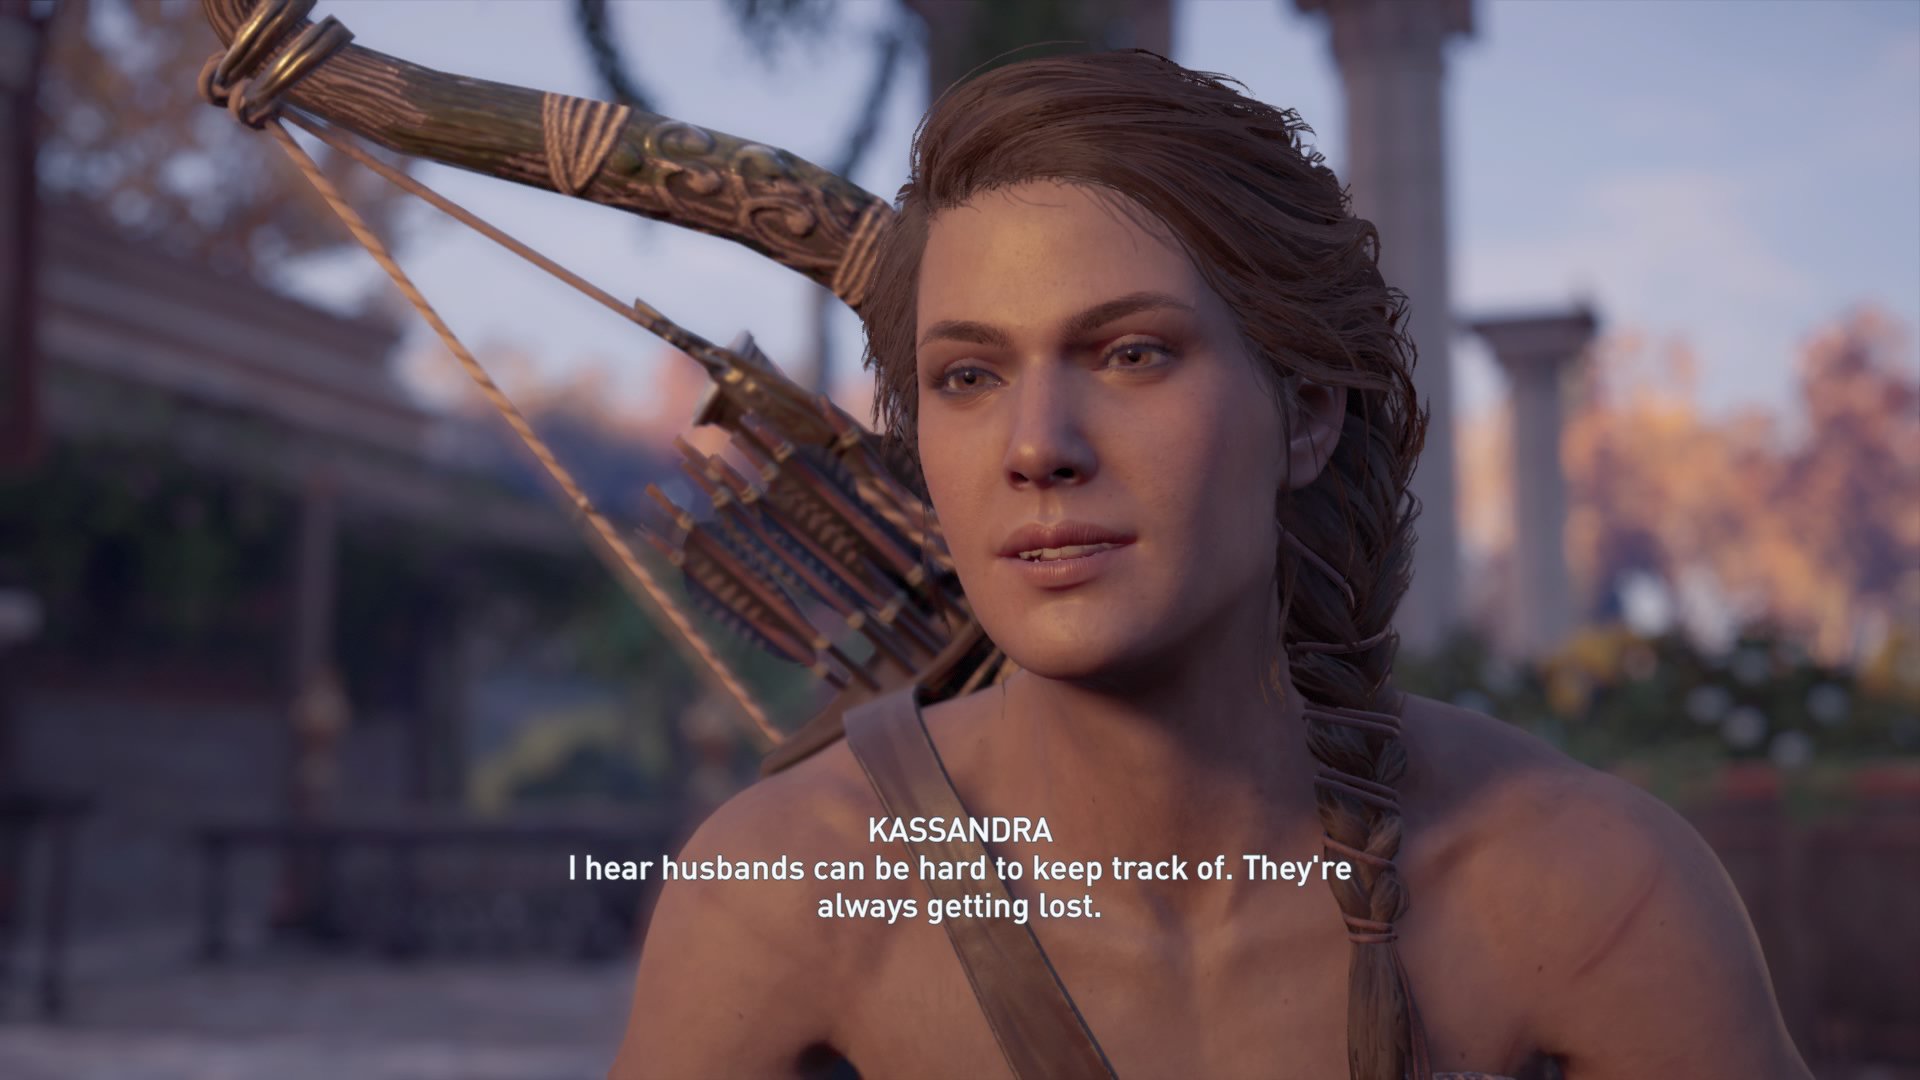 My big fat Greek adventuring: Assassin's Creed Odyssey review